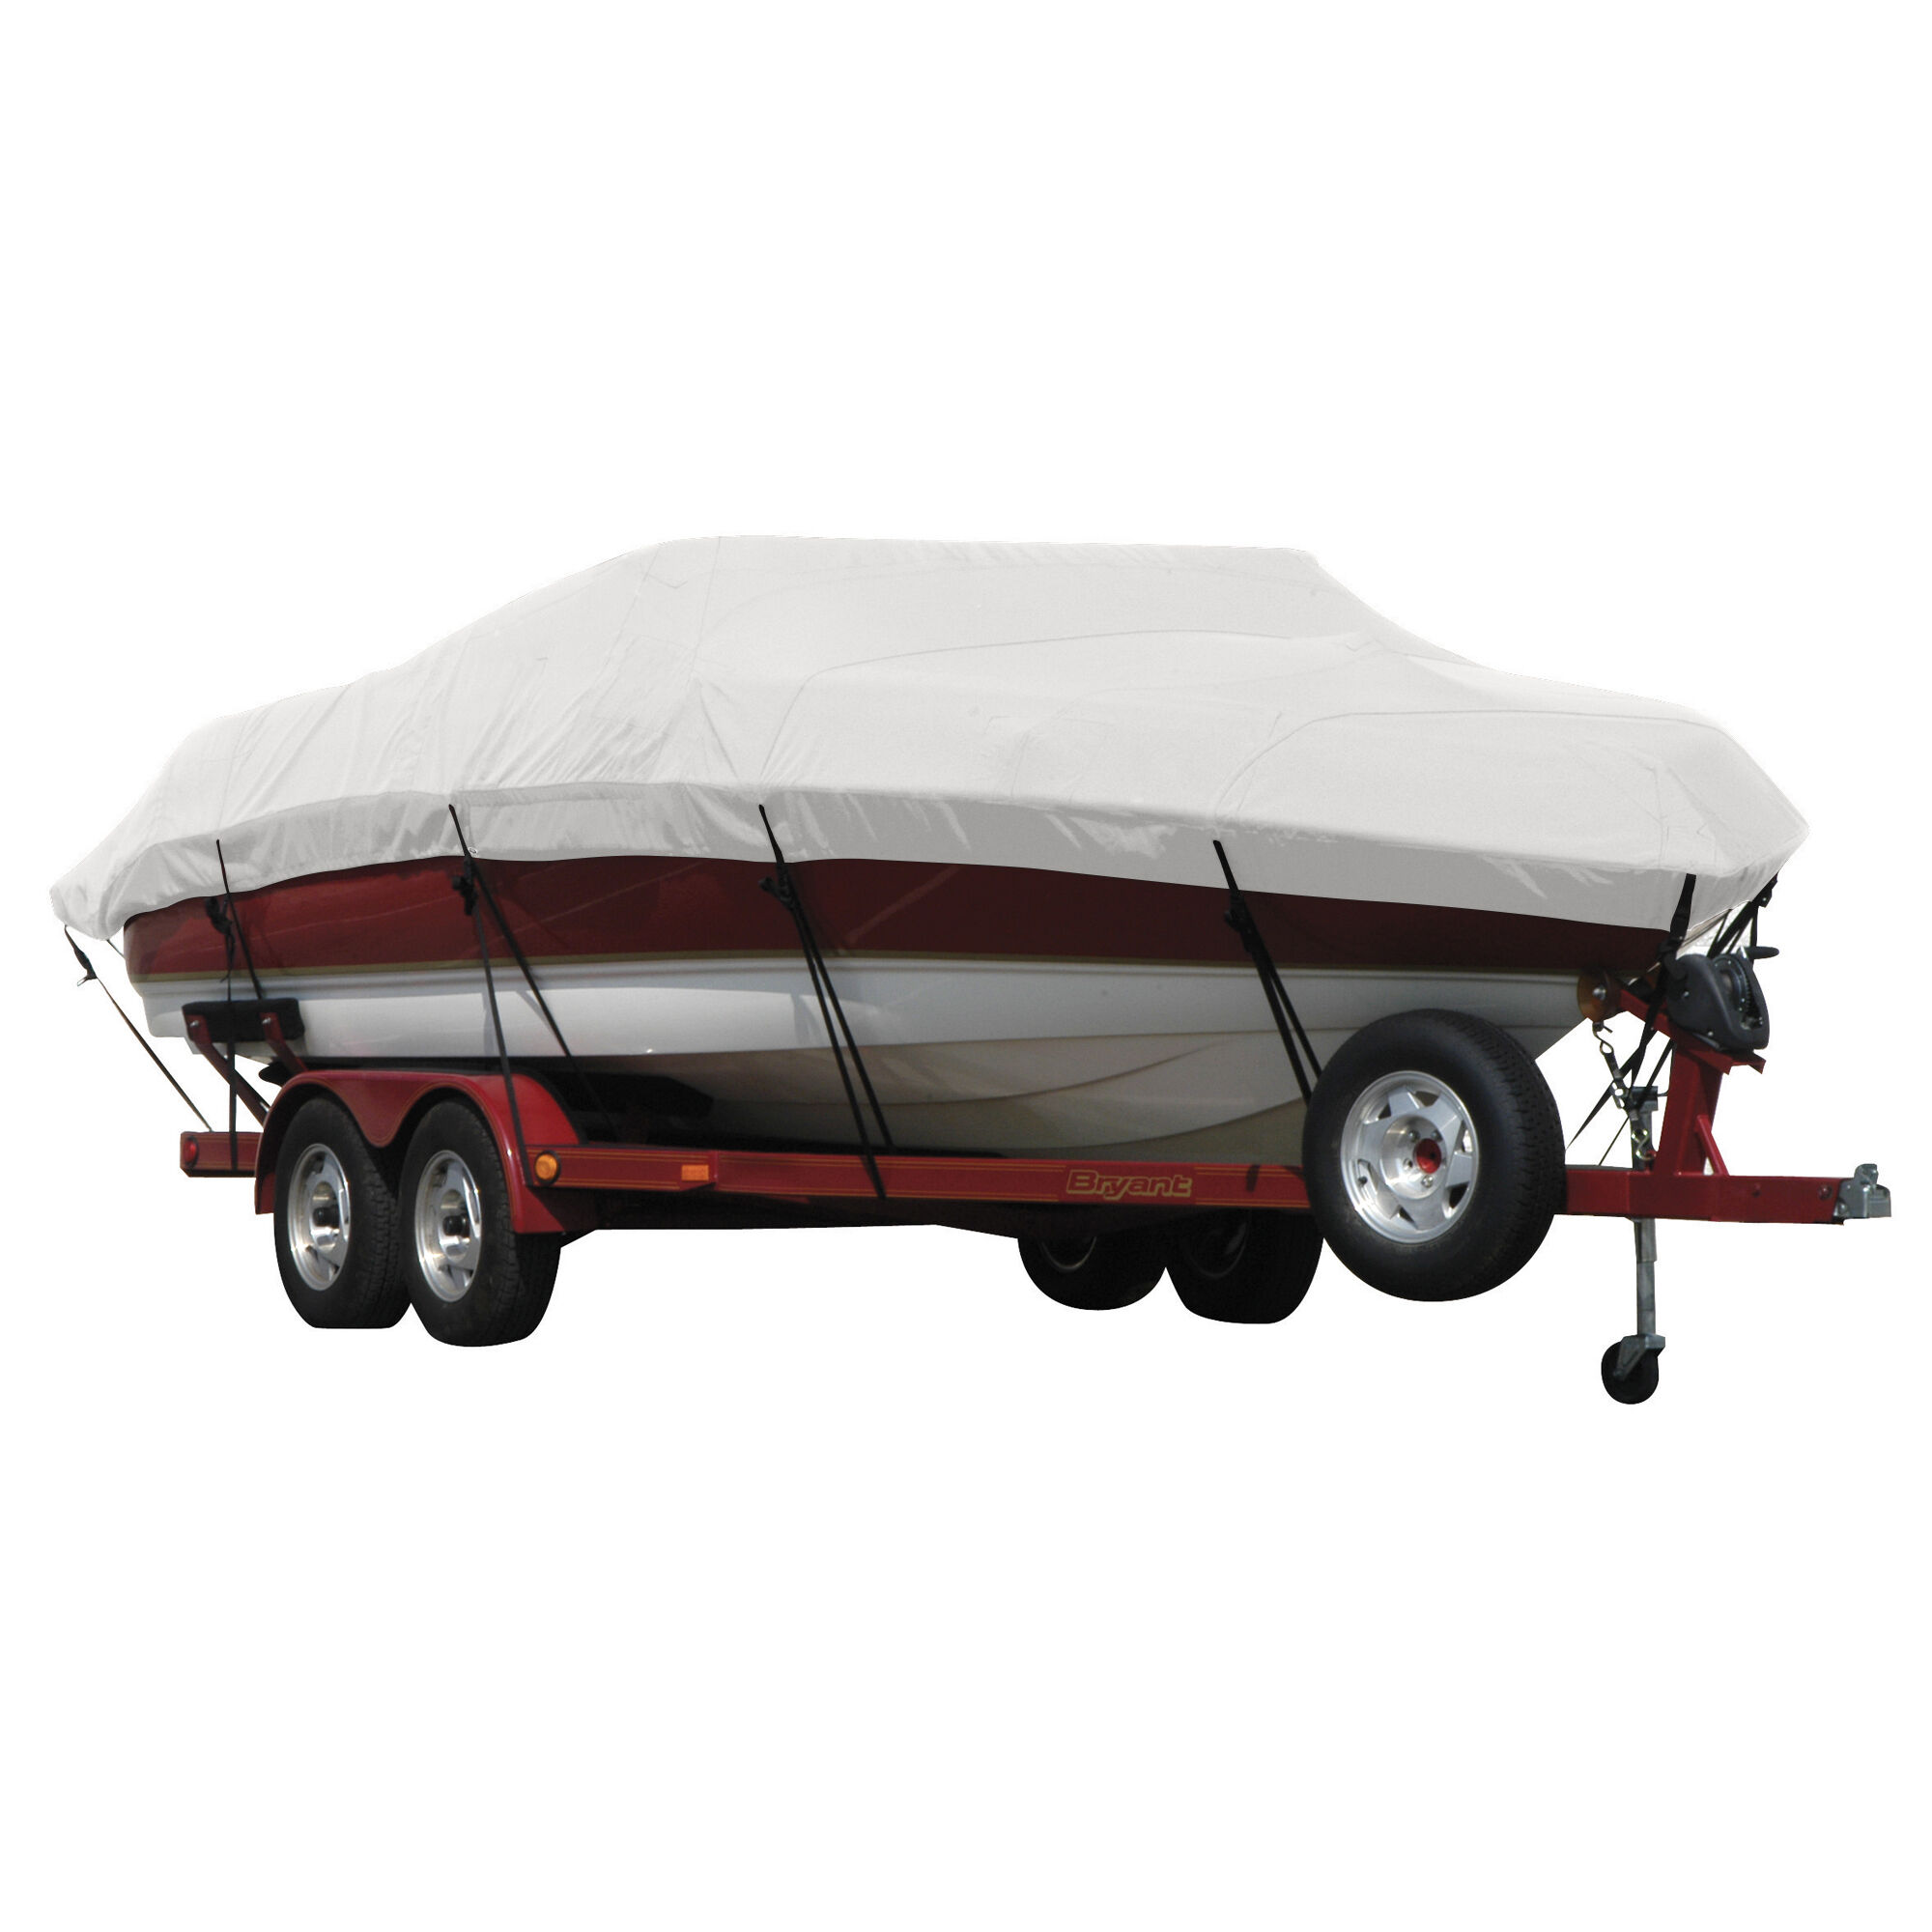 Covermate Exact Fit Sunbrella Boat Cover for Procraft 200 200 Side Console w/ Shield w/ Port Trolling Motor O/B. Natural in Natural Tan